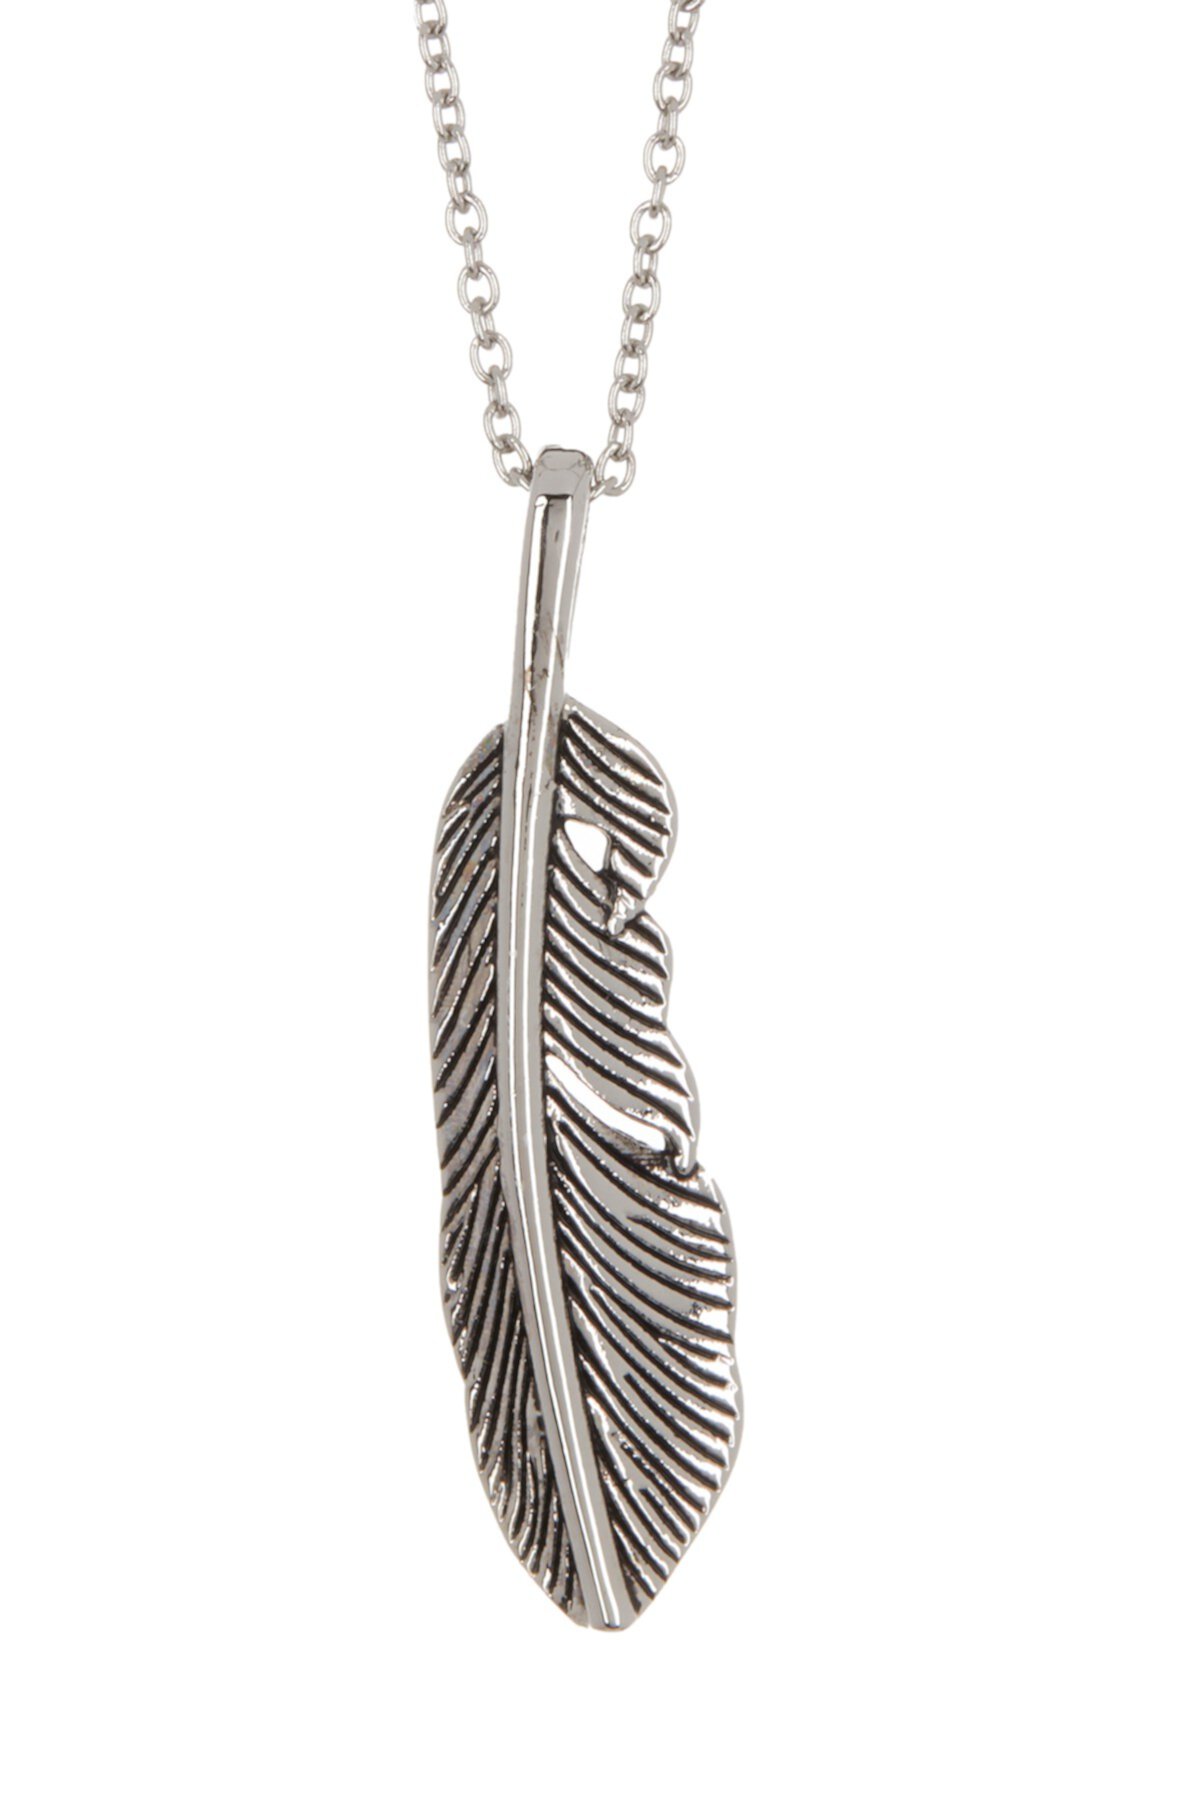 Antiqued Feather Pendant Necklace Link Up